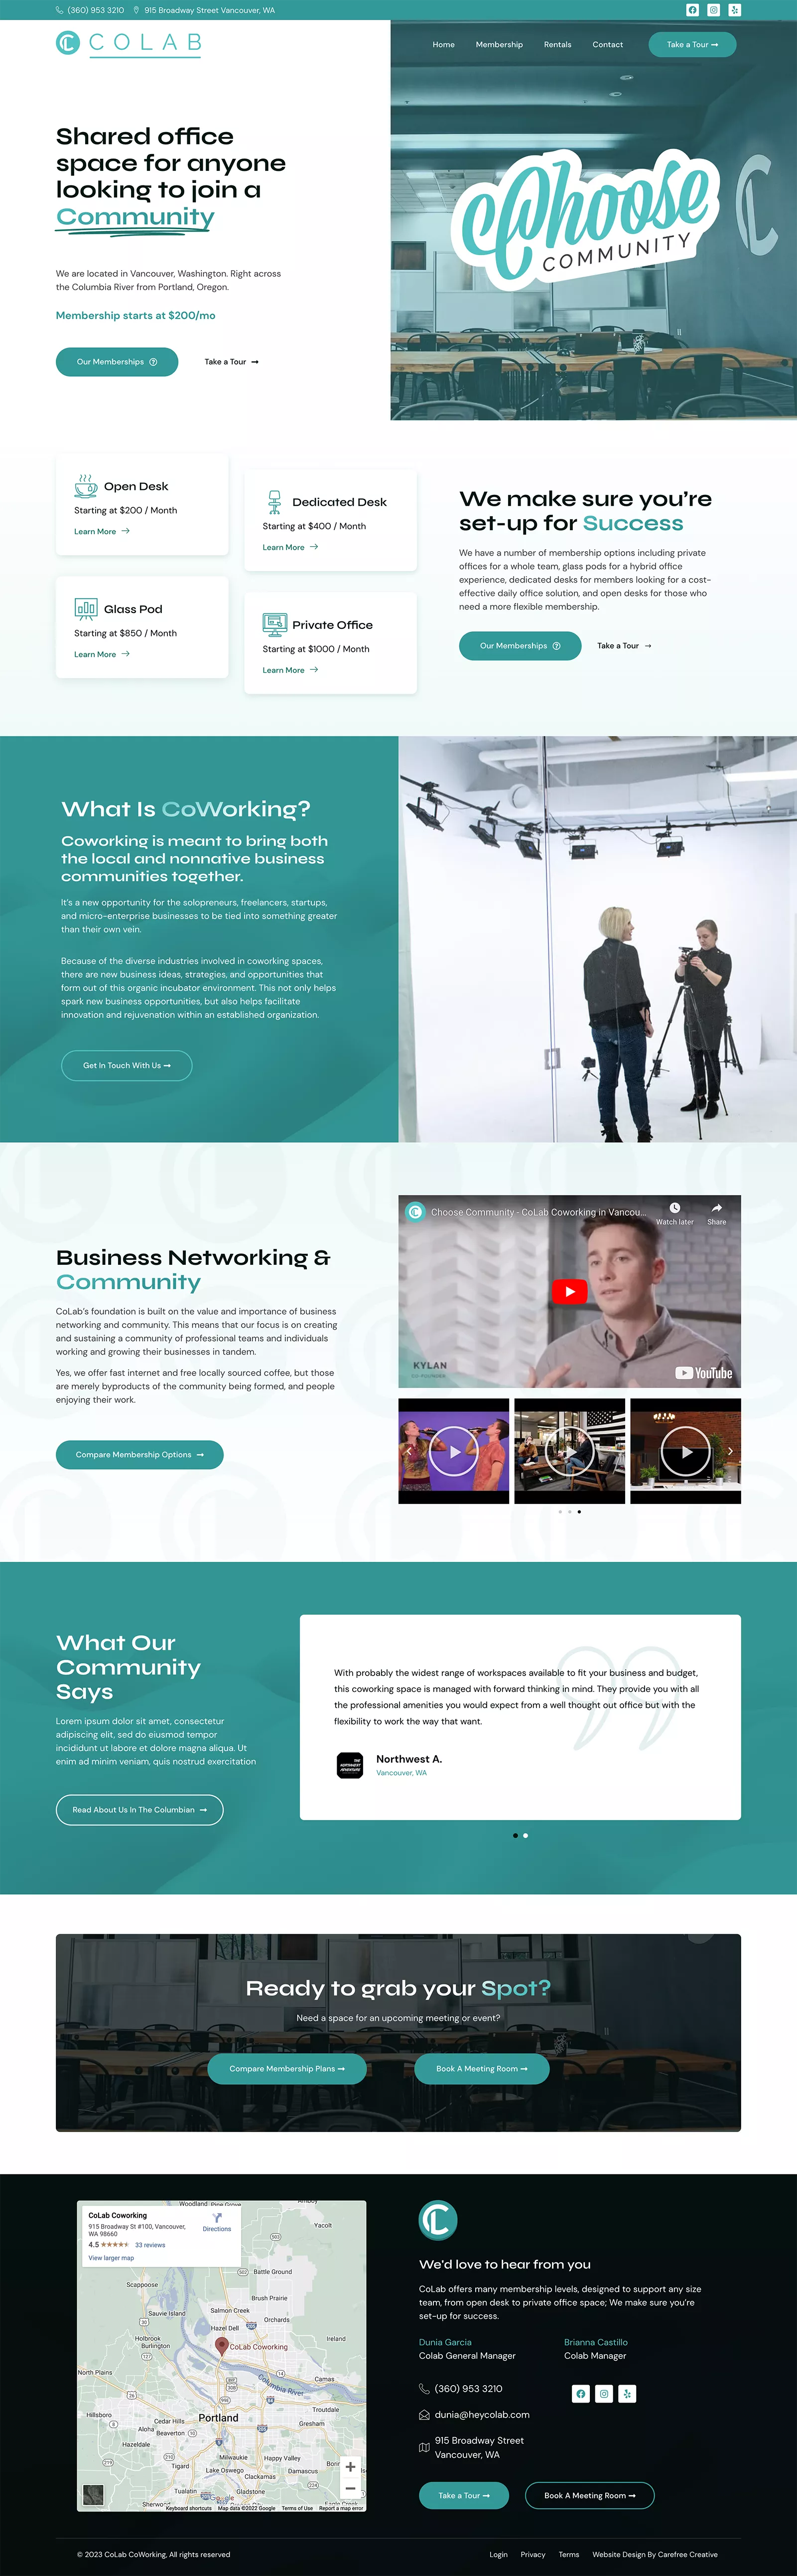 CoLab CoWorking Website Full